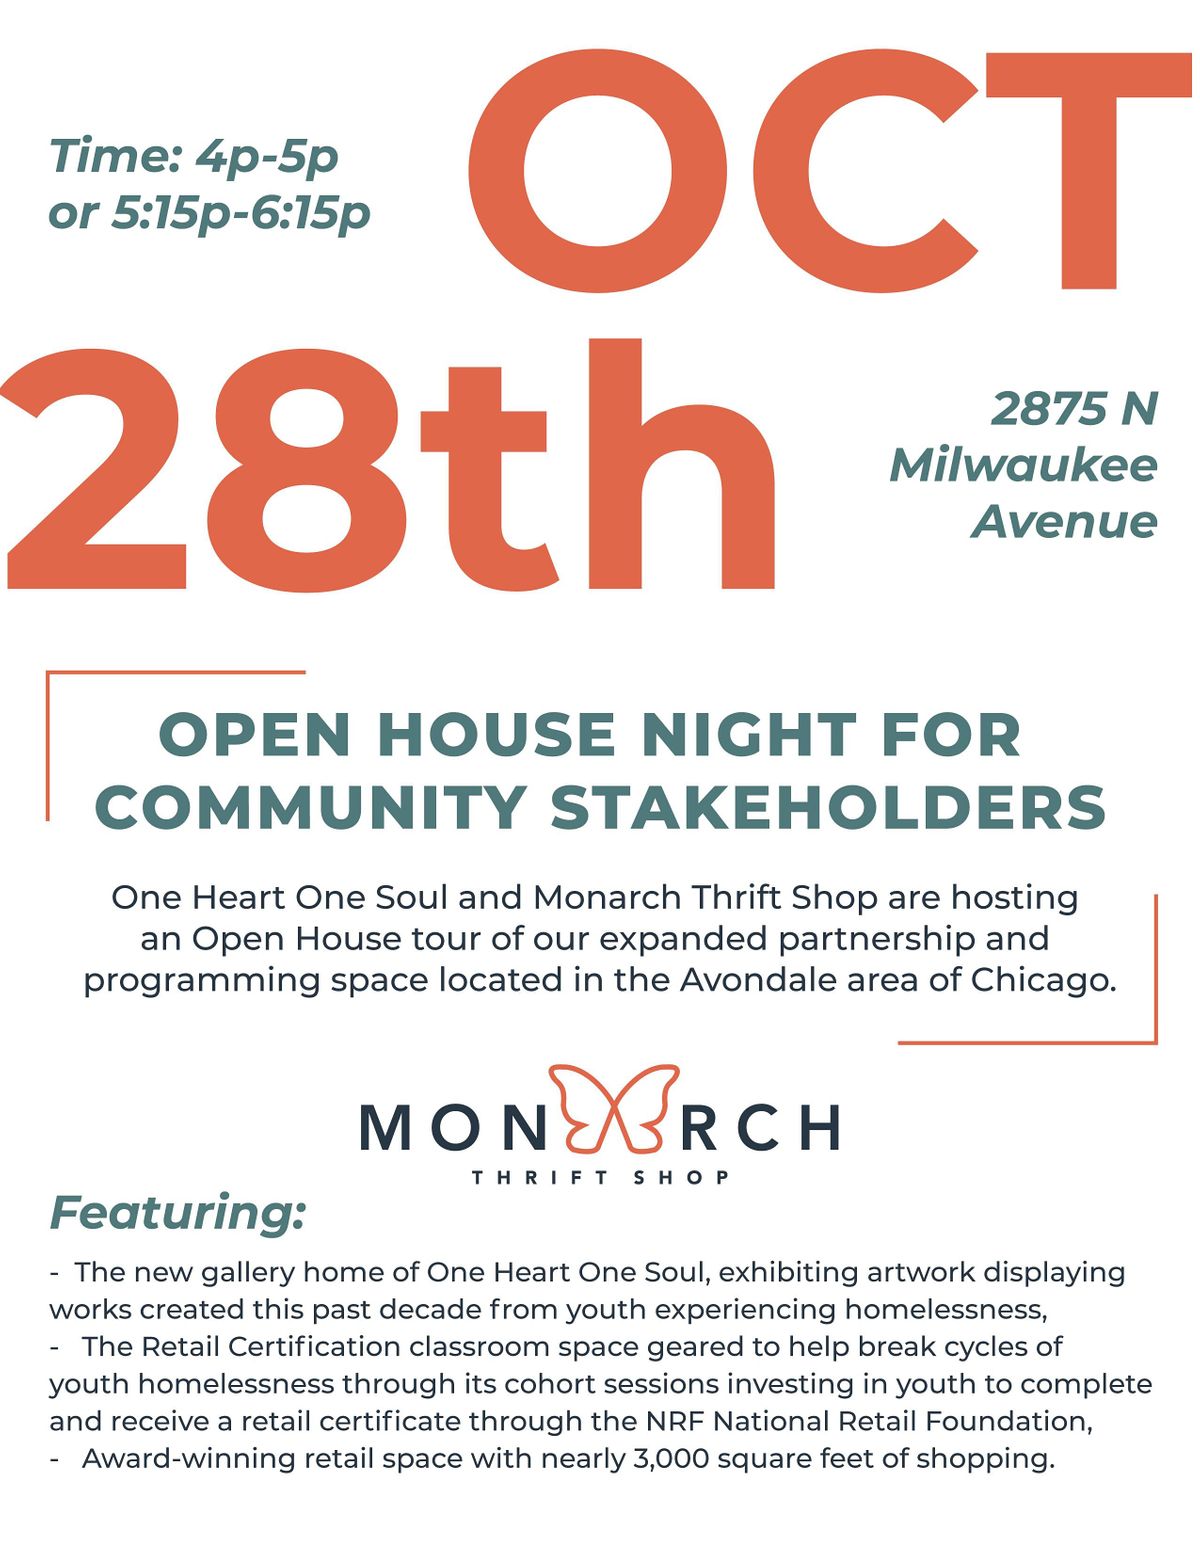 Welcome To The Space! One Heart One Soul x Monarch Thrift Shop